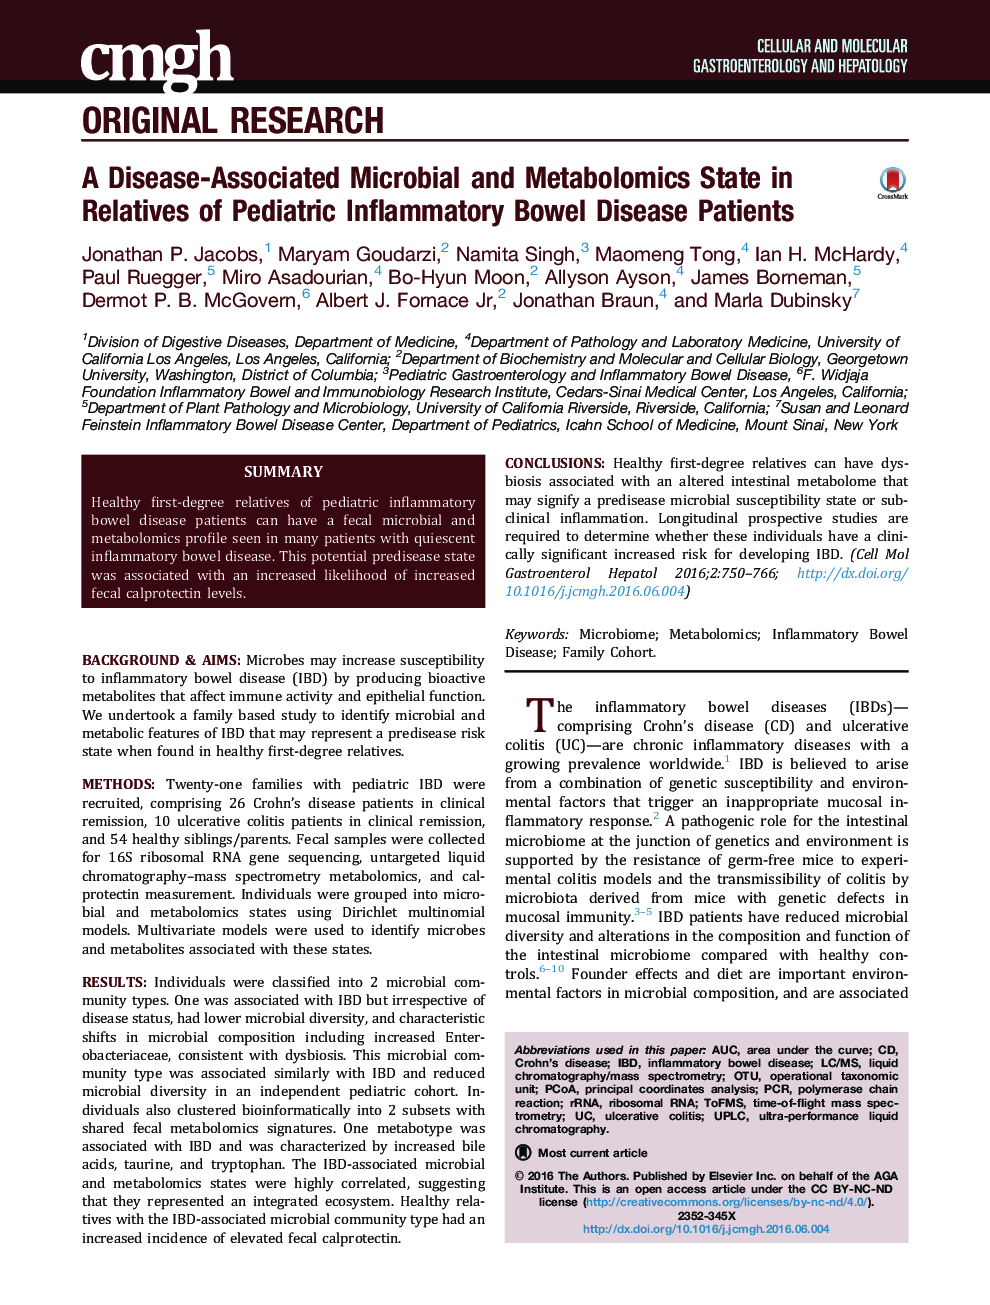 A Disease-Associated Microbial and Metabolomics State in Relatives of Pediatric Inflammatory Bowel Disease Patients